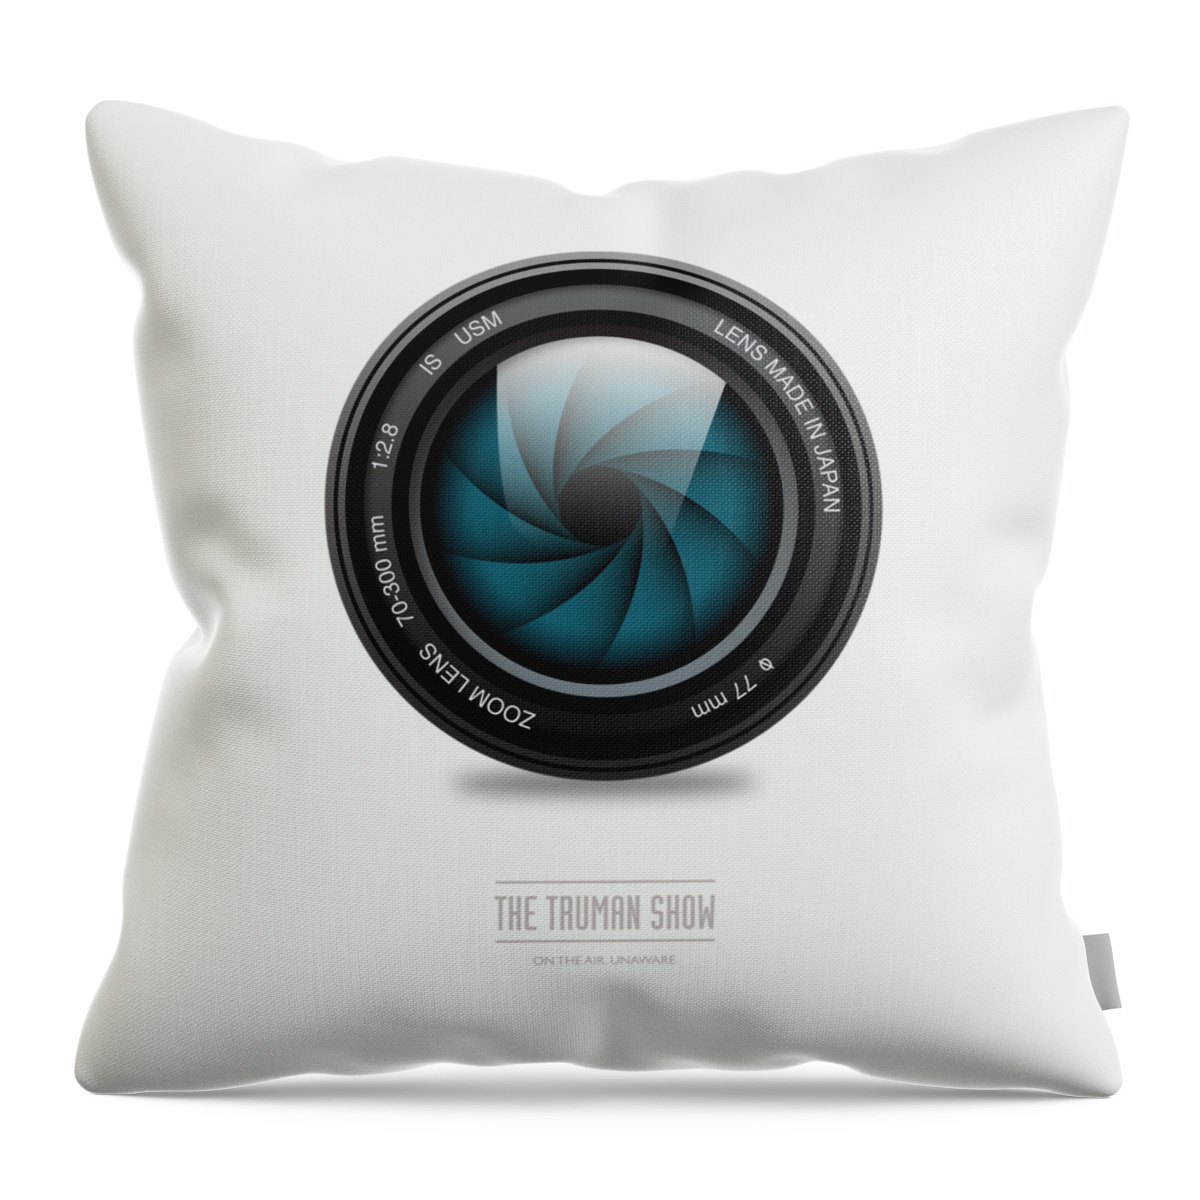 The Truman Show Throw Pillow featuring the digital art The Truman Show by Movie Poster Boy